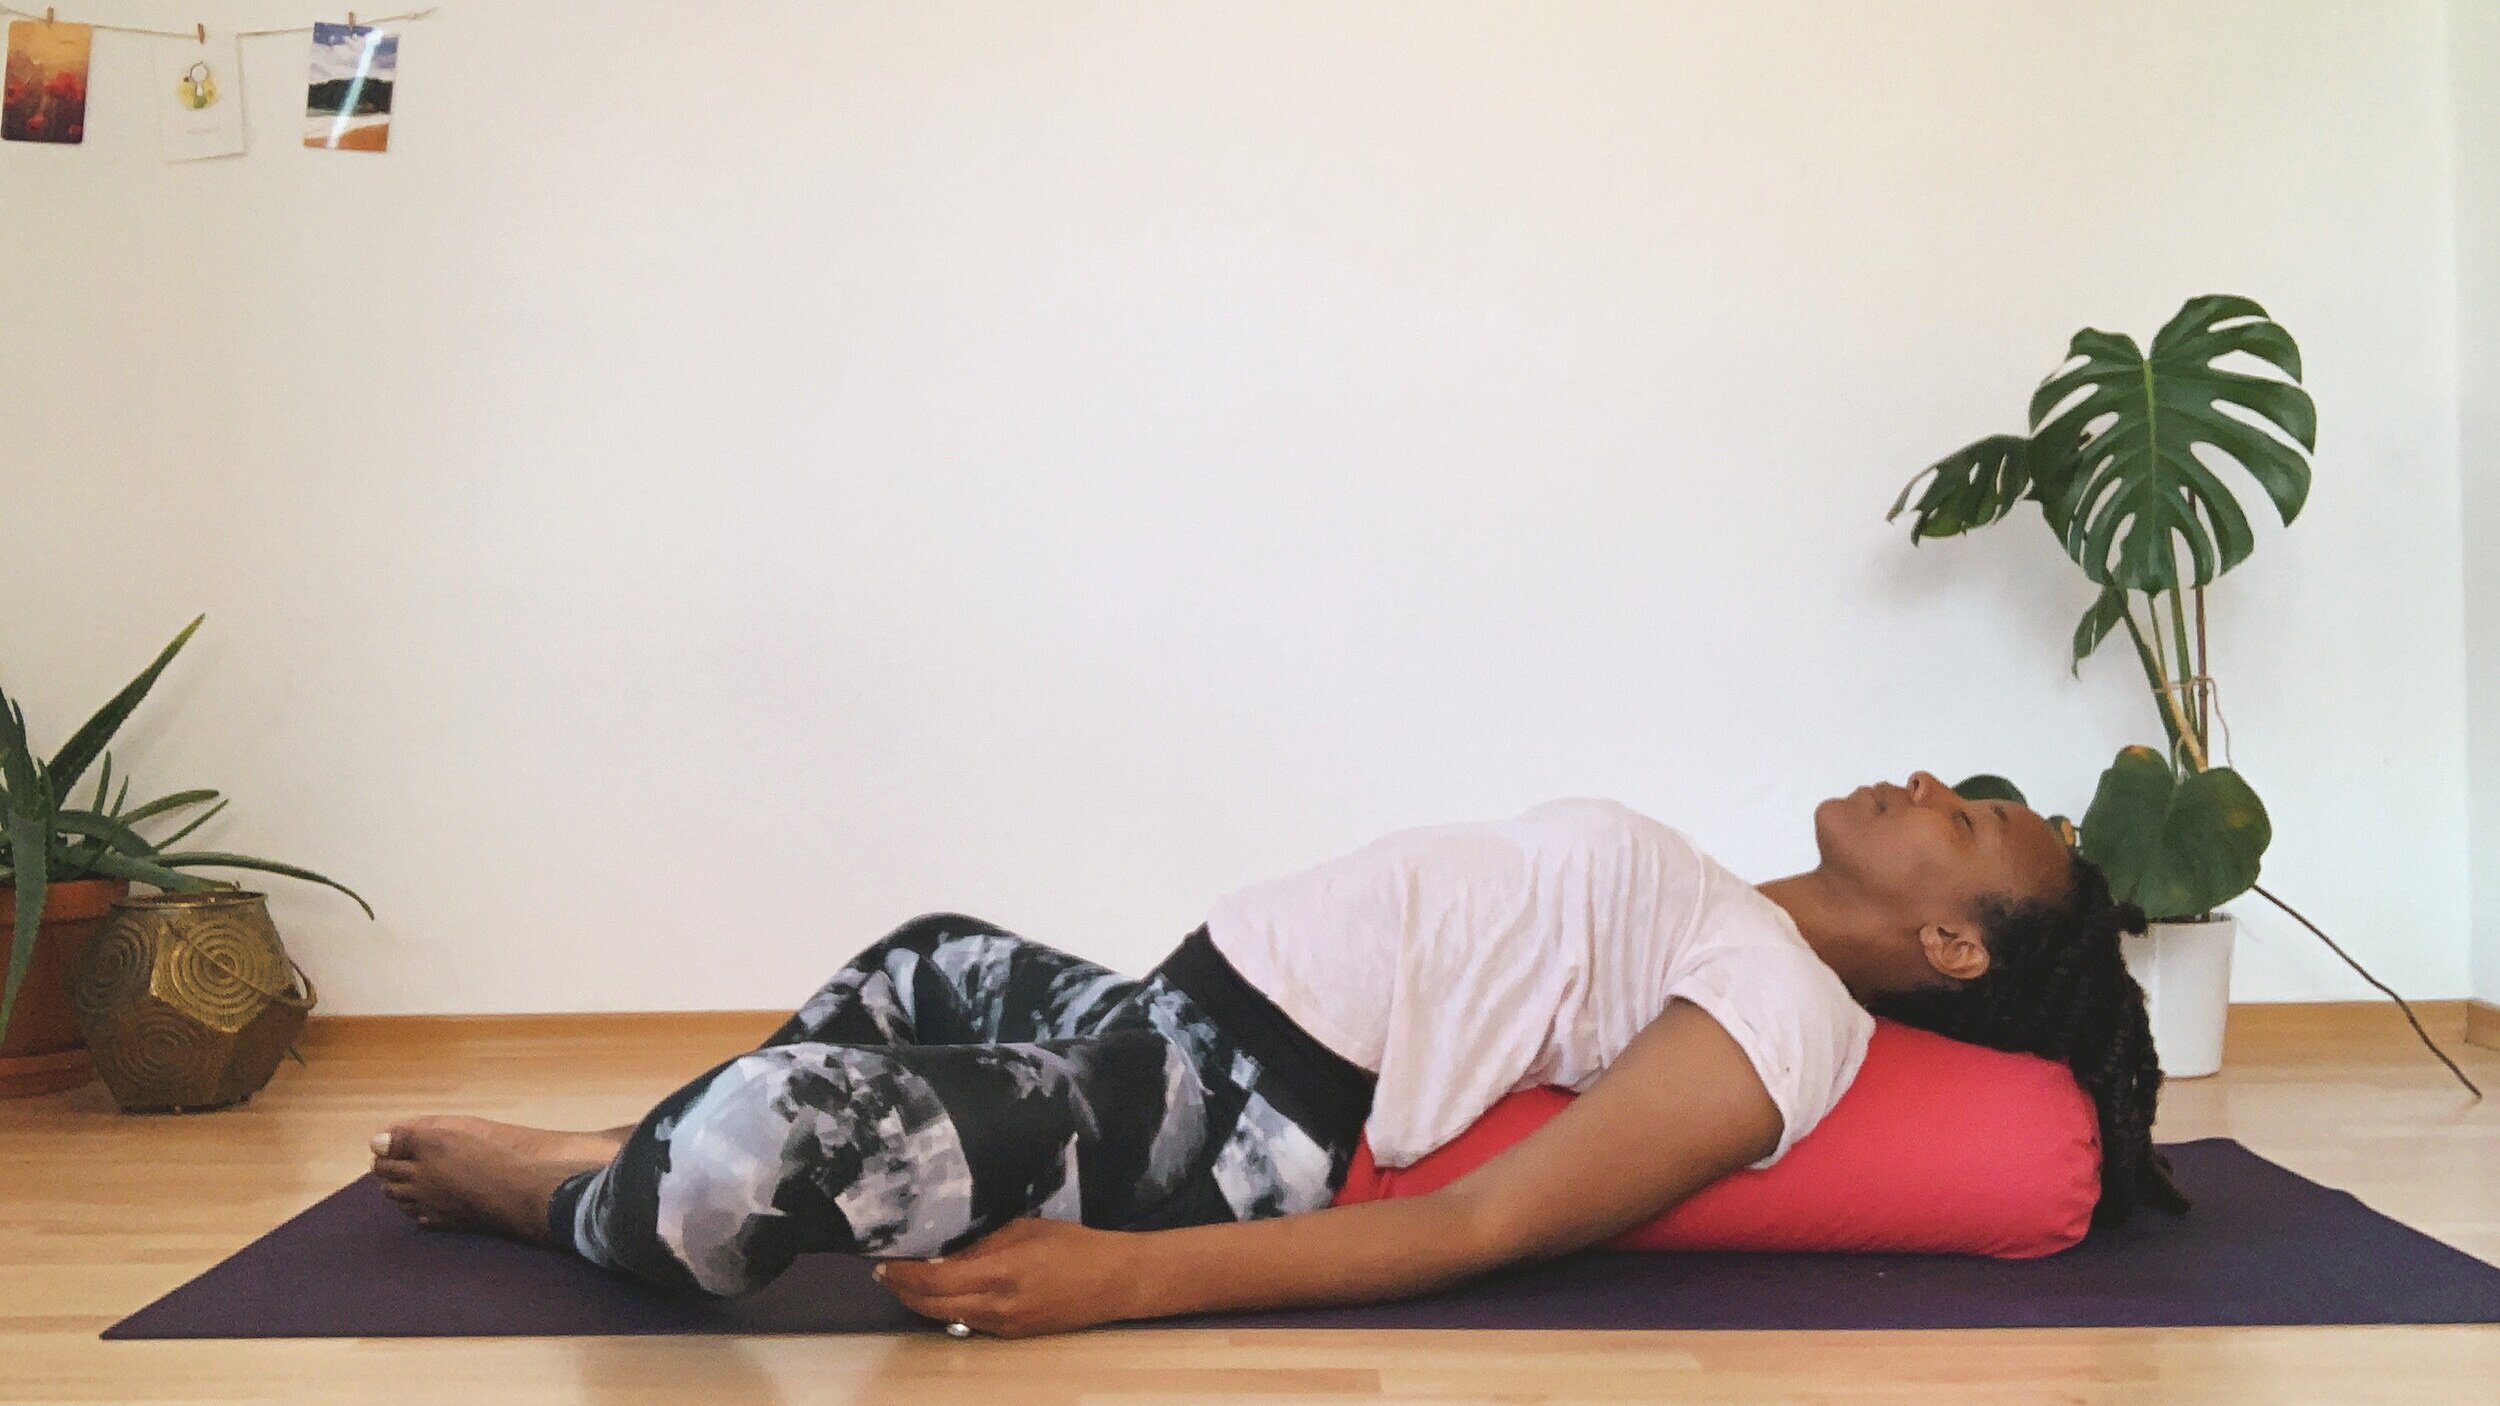 The Difference Between Yin and Restorative Yoga